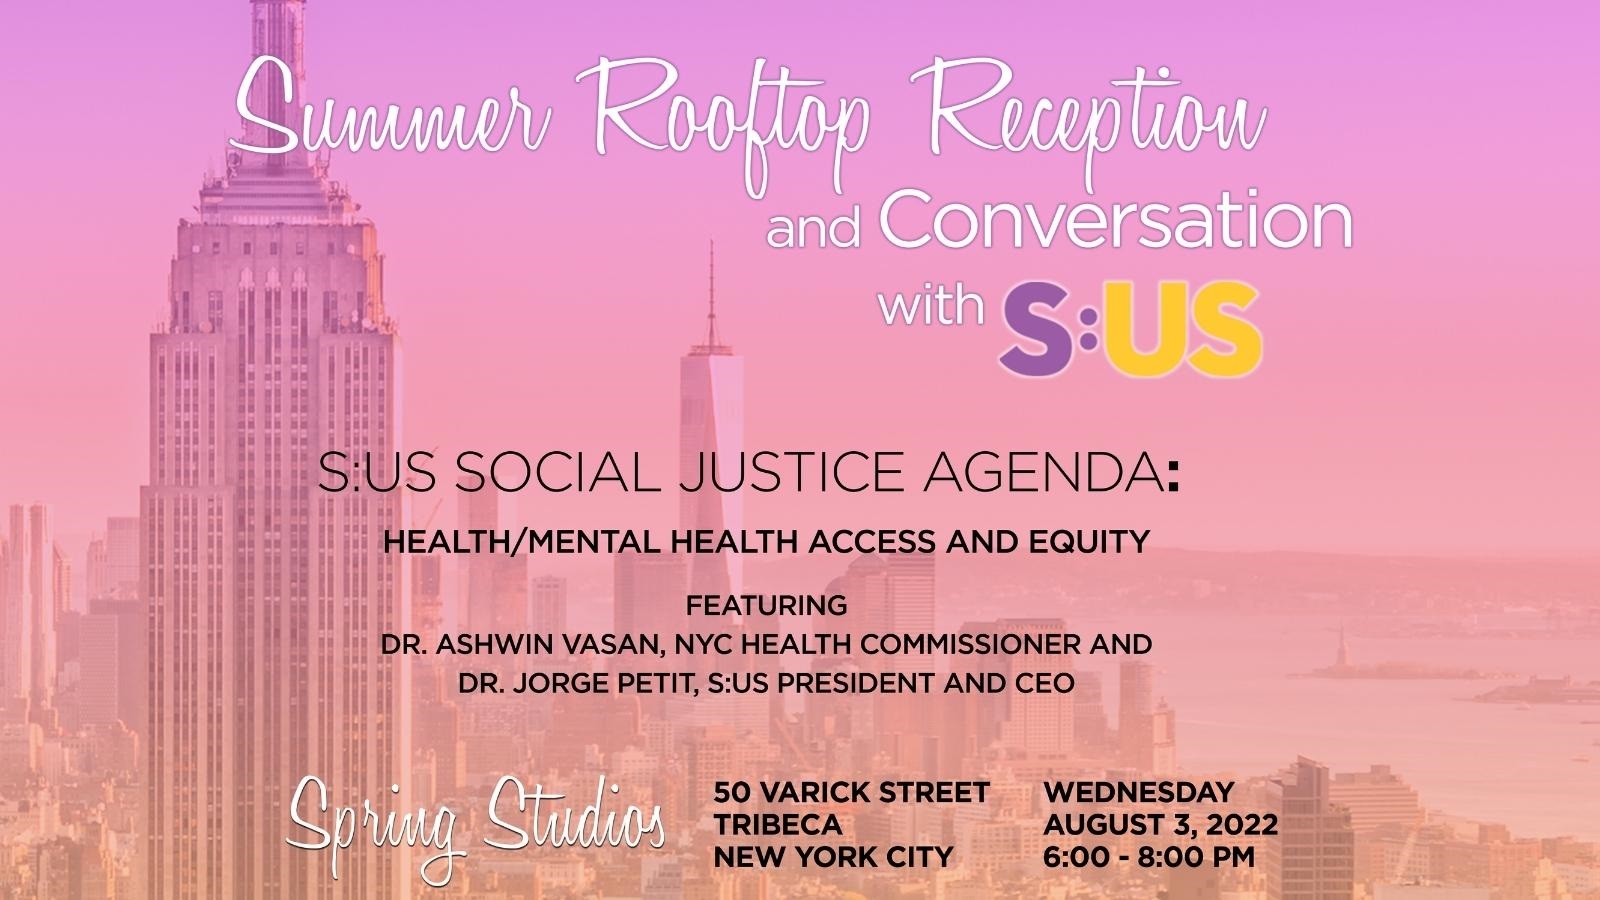 You’re invited to Summer Rooftop Reception and Conversation with S:US on August 3, 2022